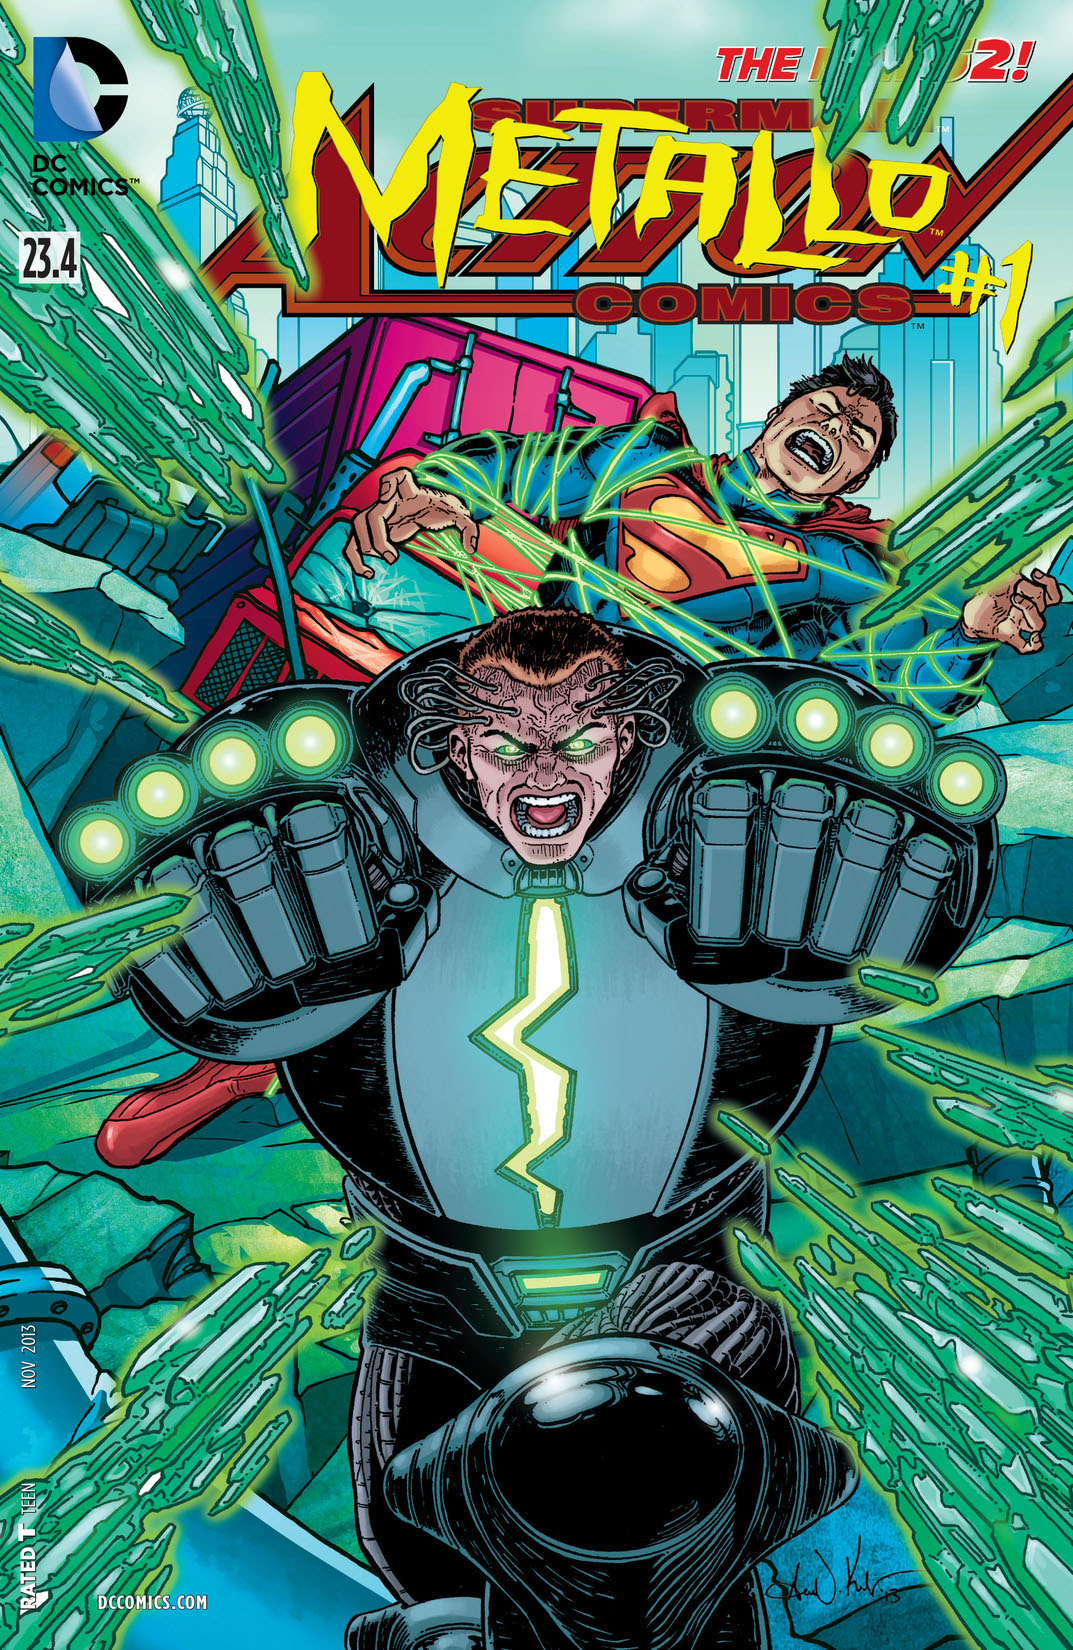 Action Comics feat Metallo (2013-) #23.4 preview images